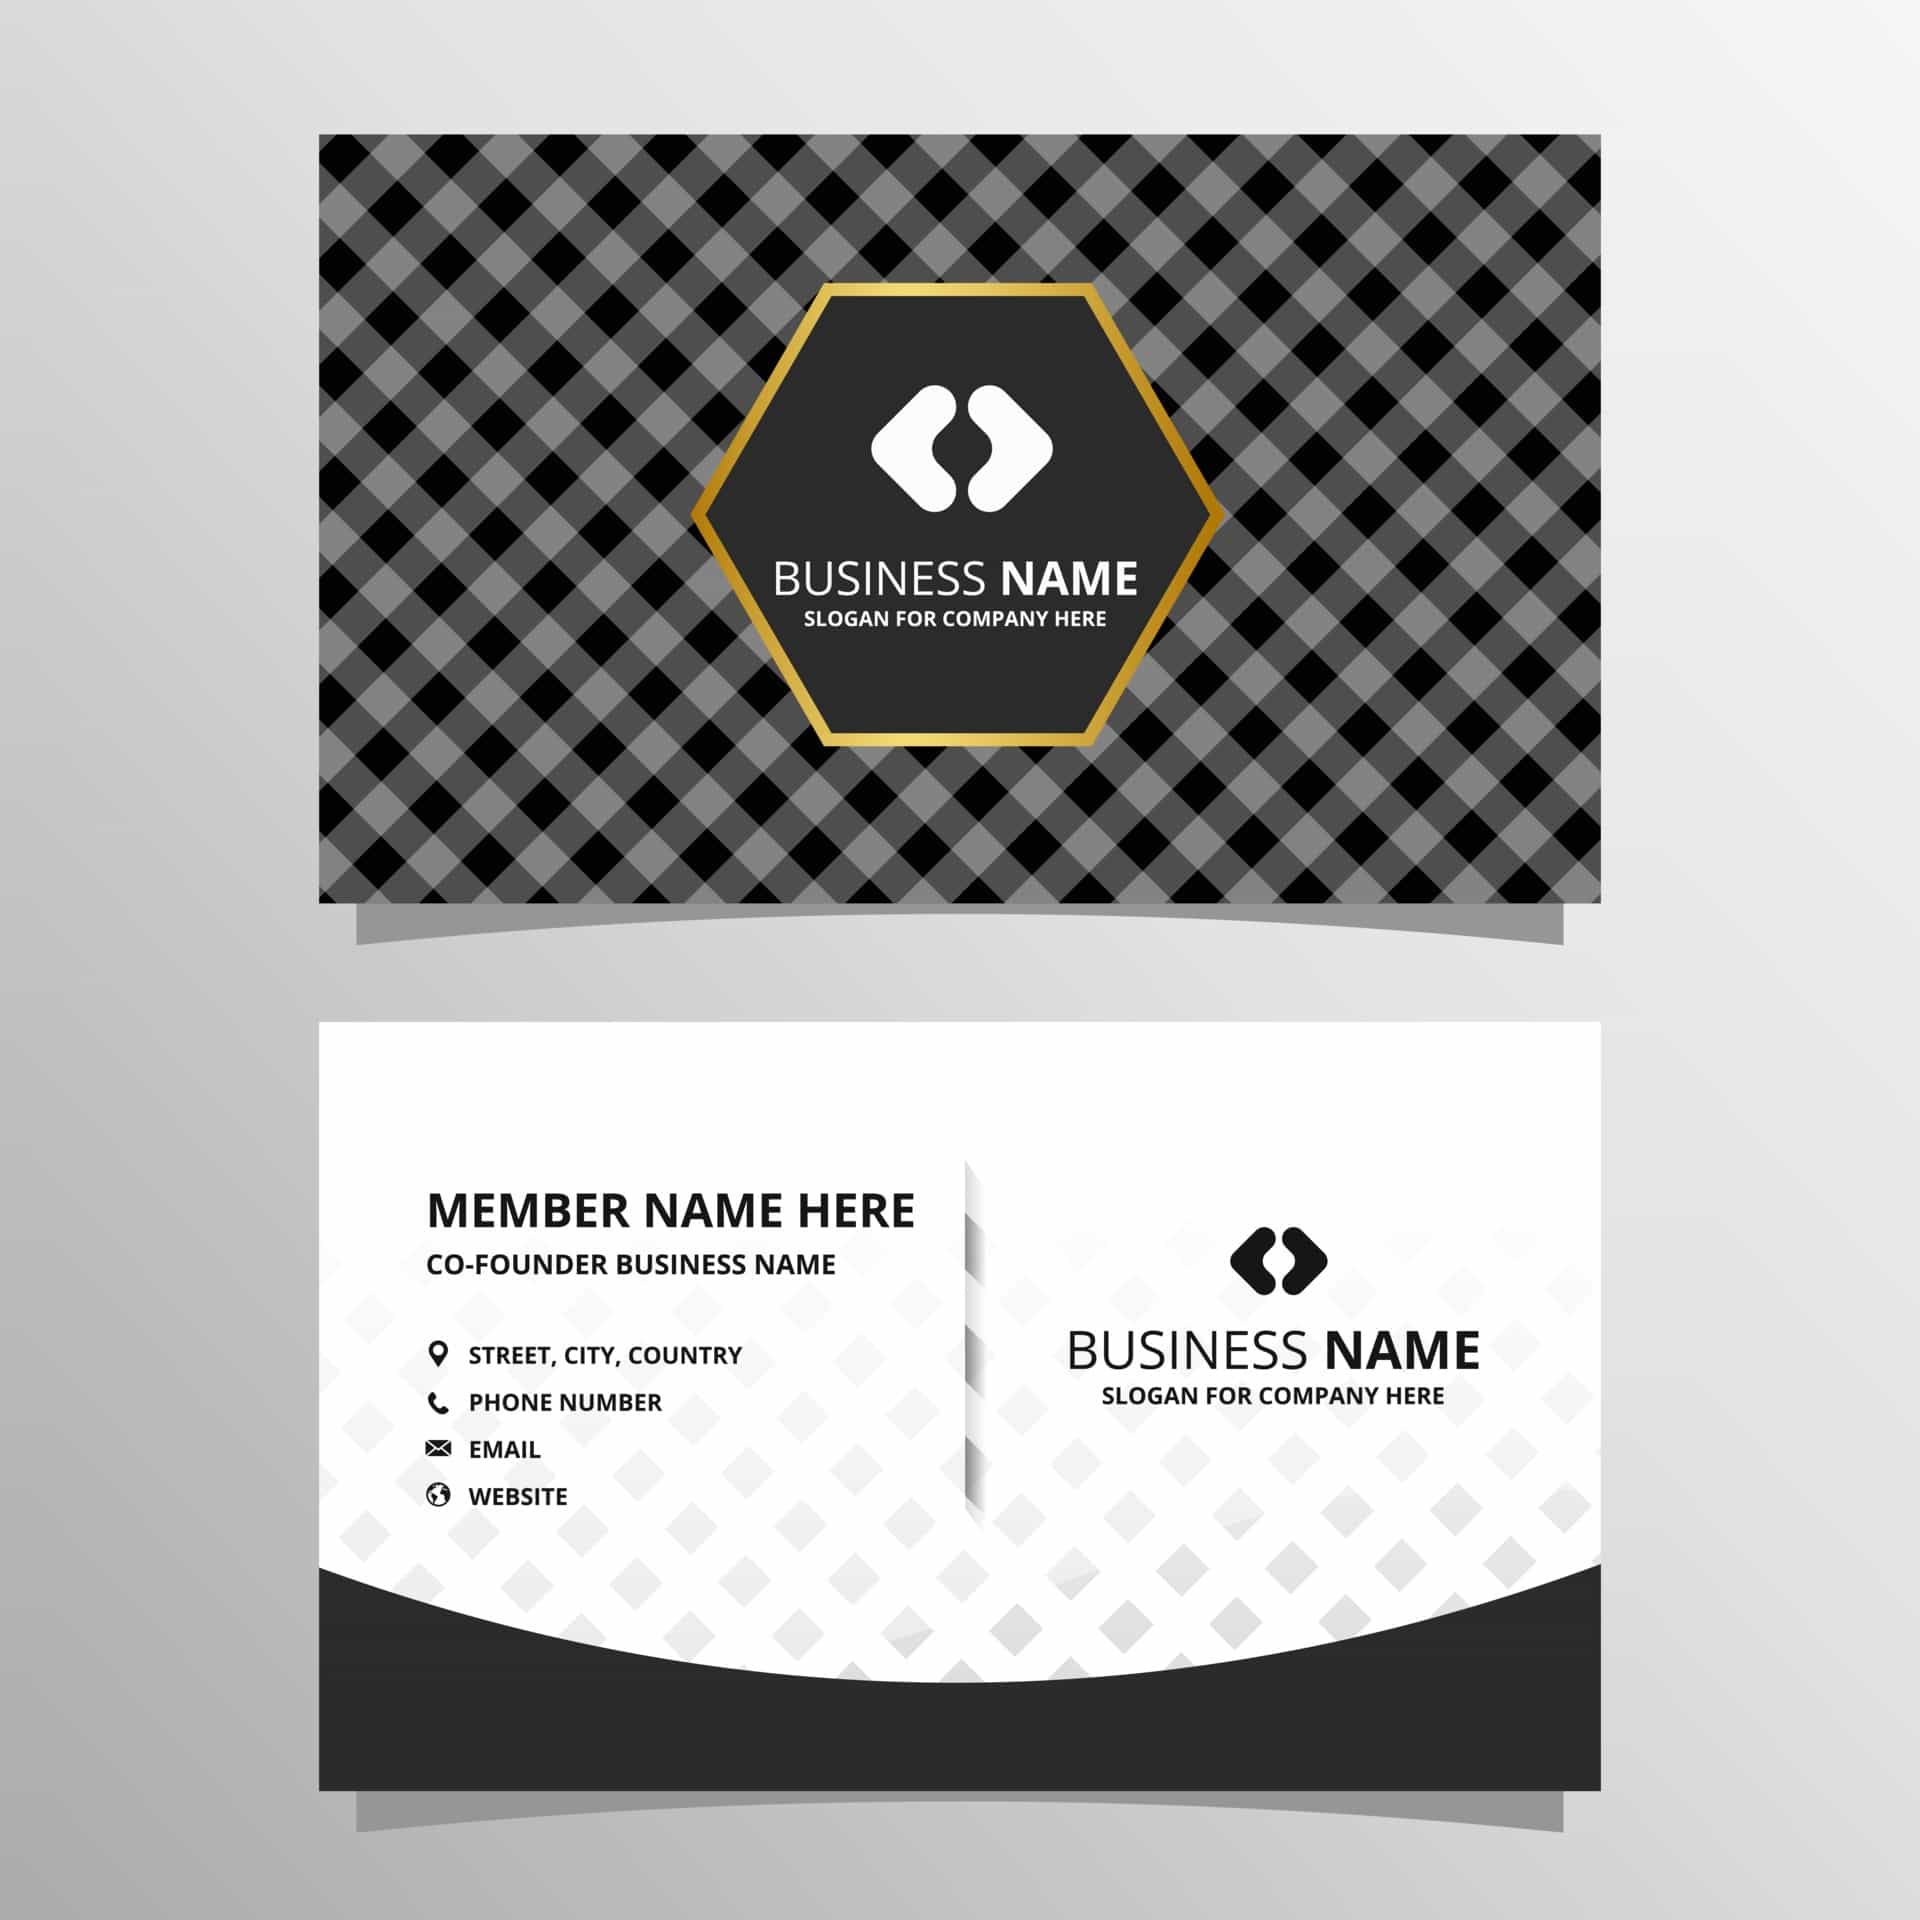 Elegant Minimal Black and White Business Card Template with Gingham Pattern Vector File